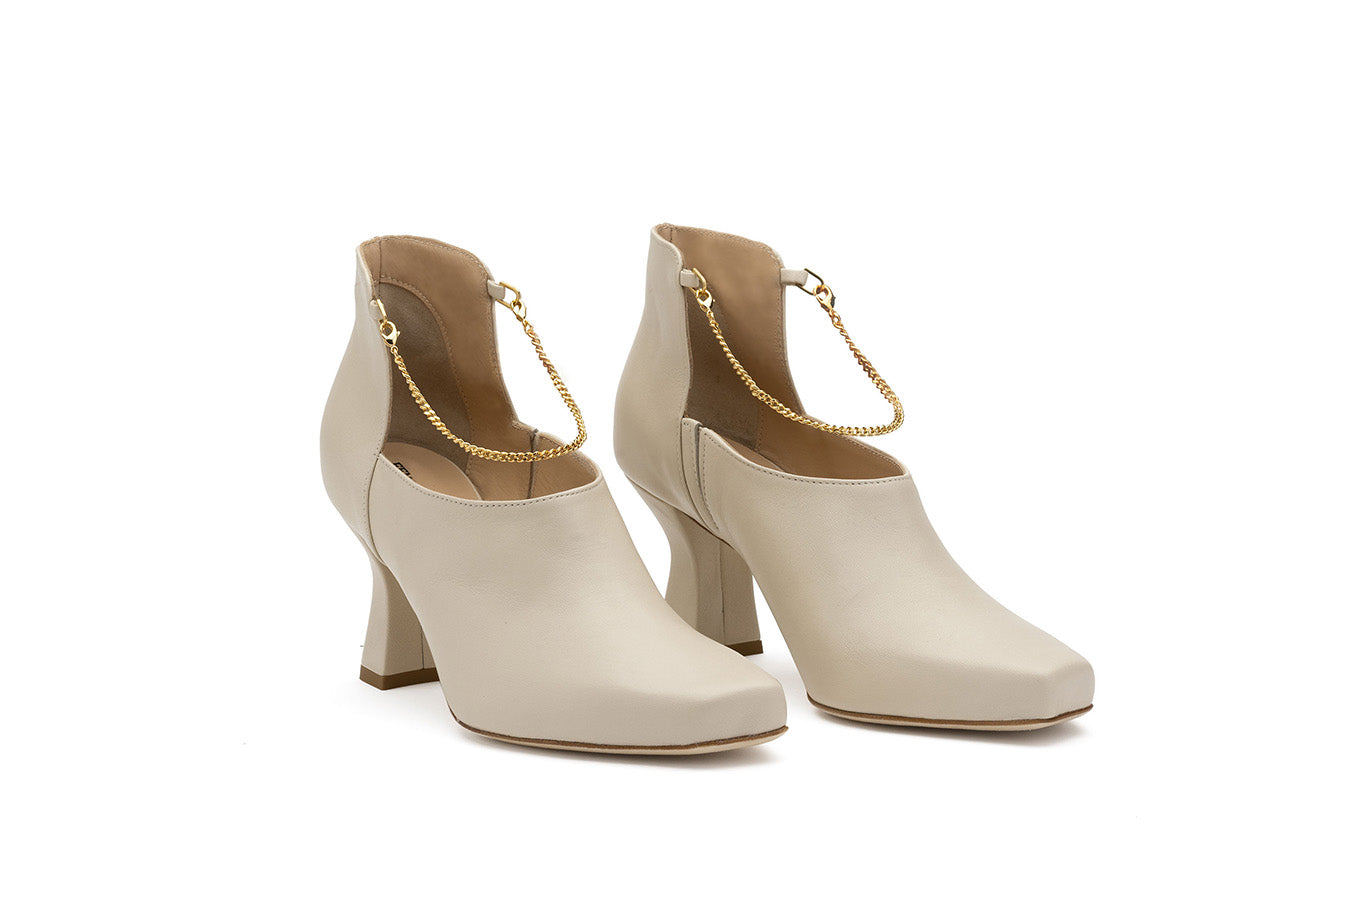 Pair of Ivory boot shoes for ladies shot at the side on a white background